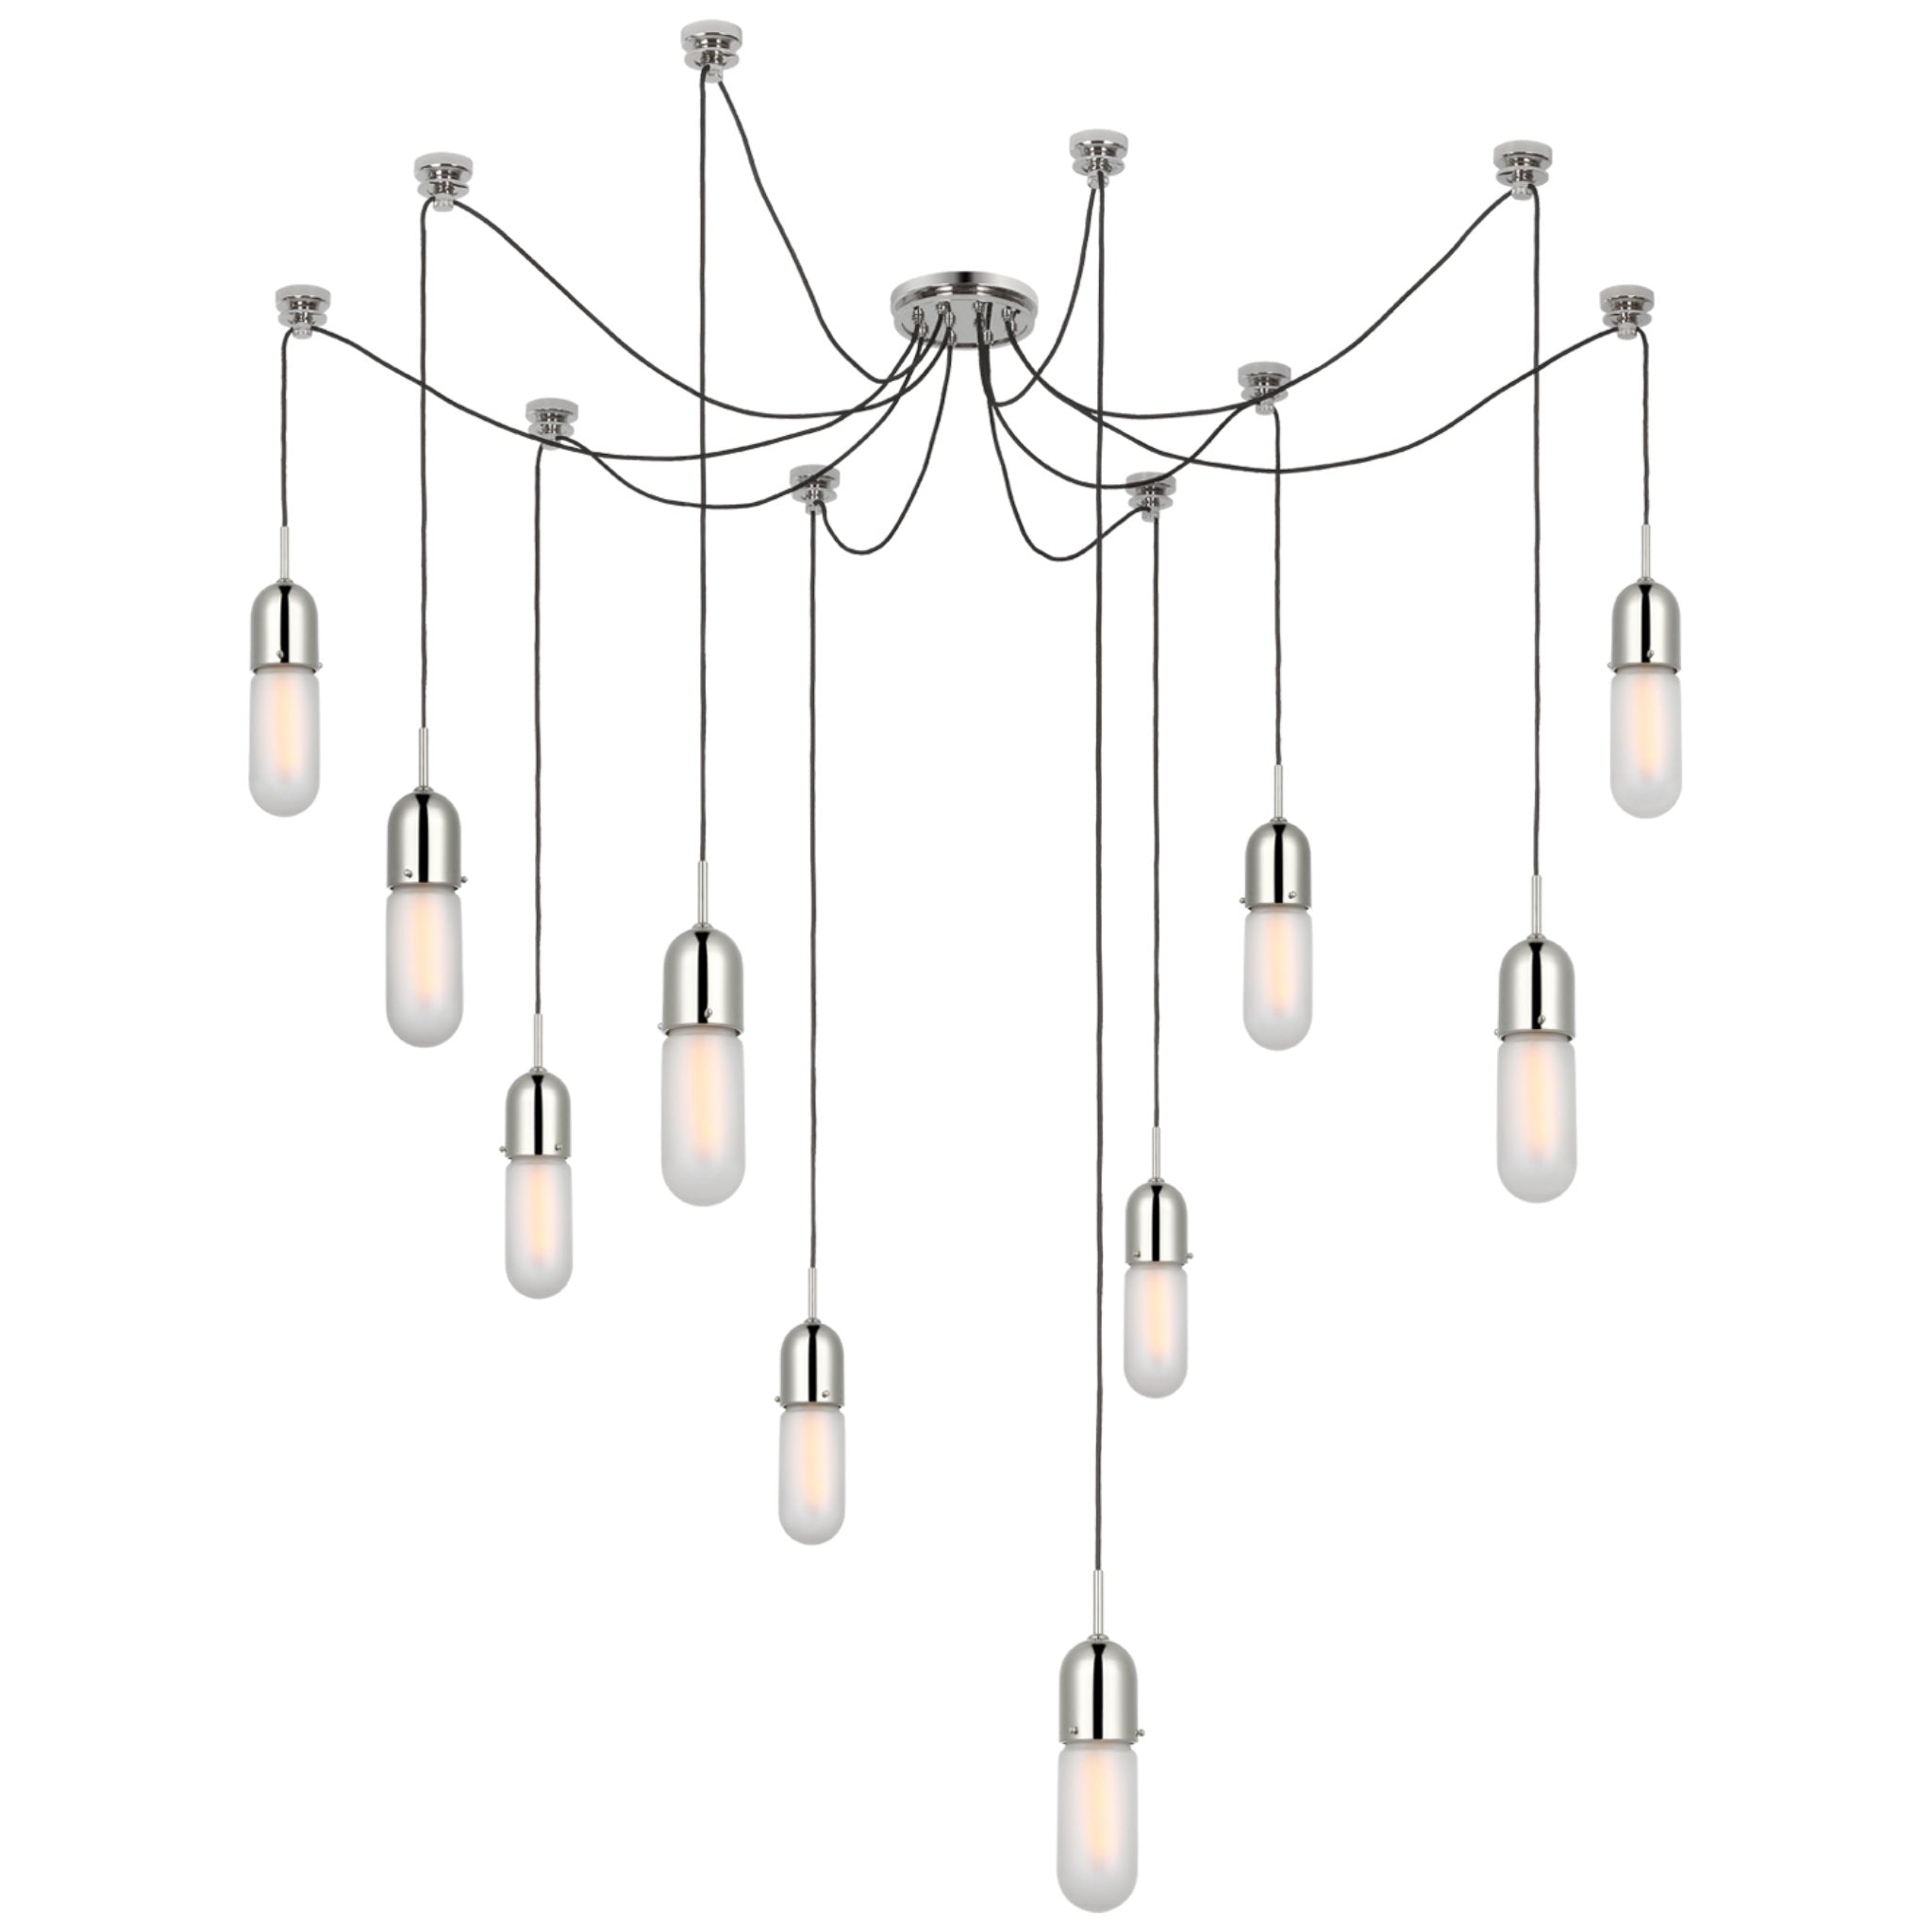 Thomas O'Brien Junio 10-Light Chandelier in Polished Nickel with Frosted Glass